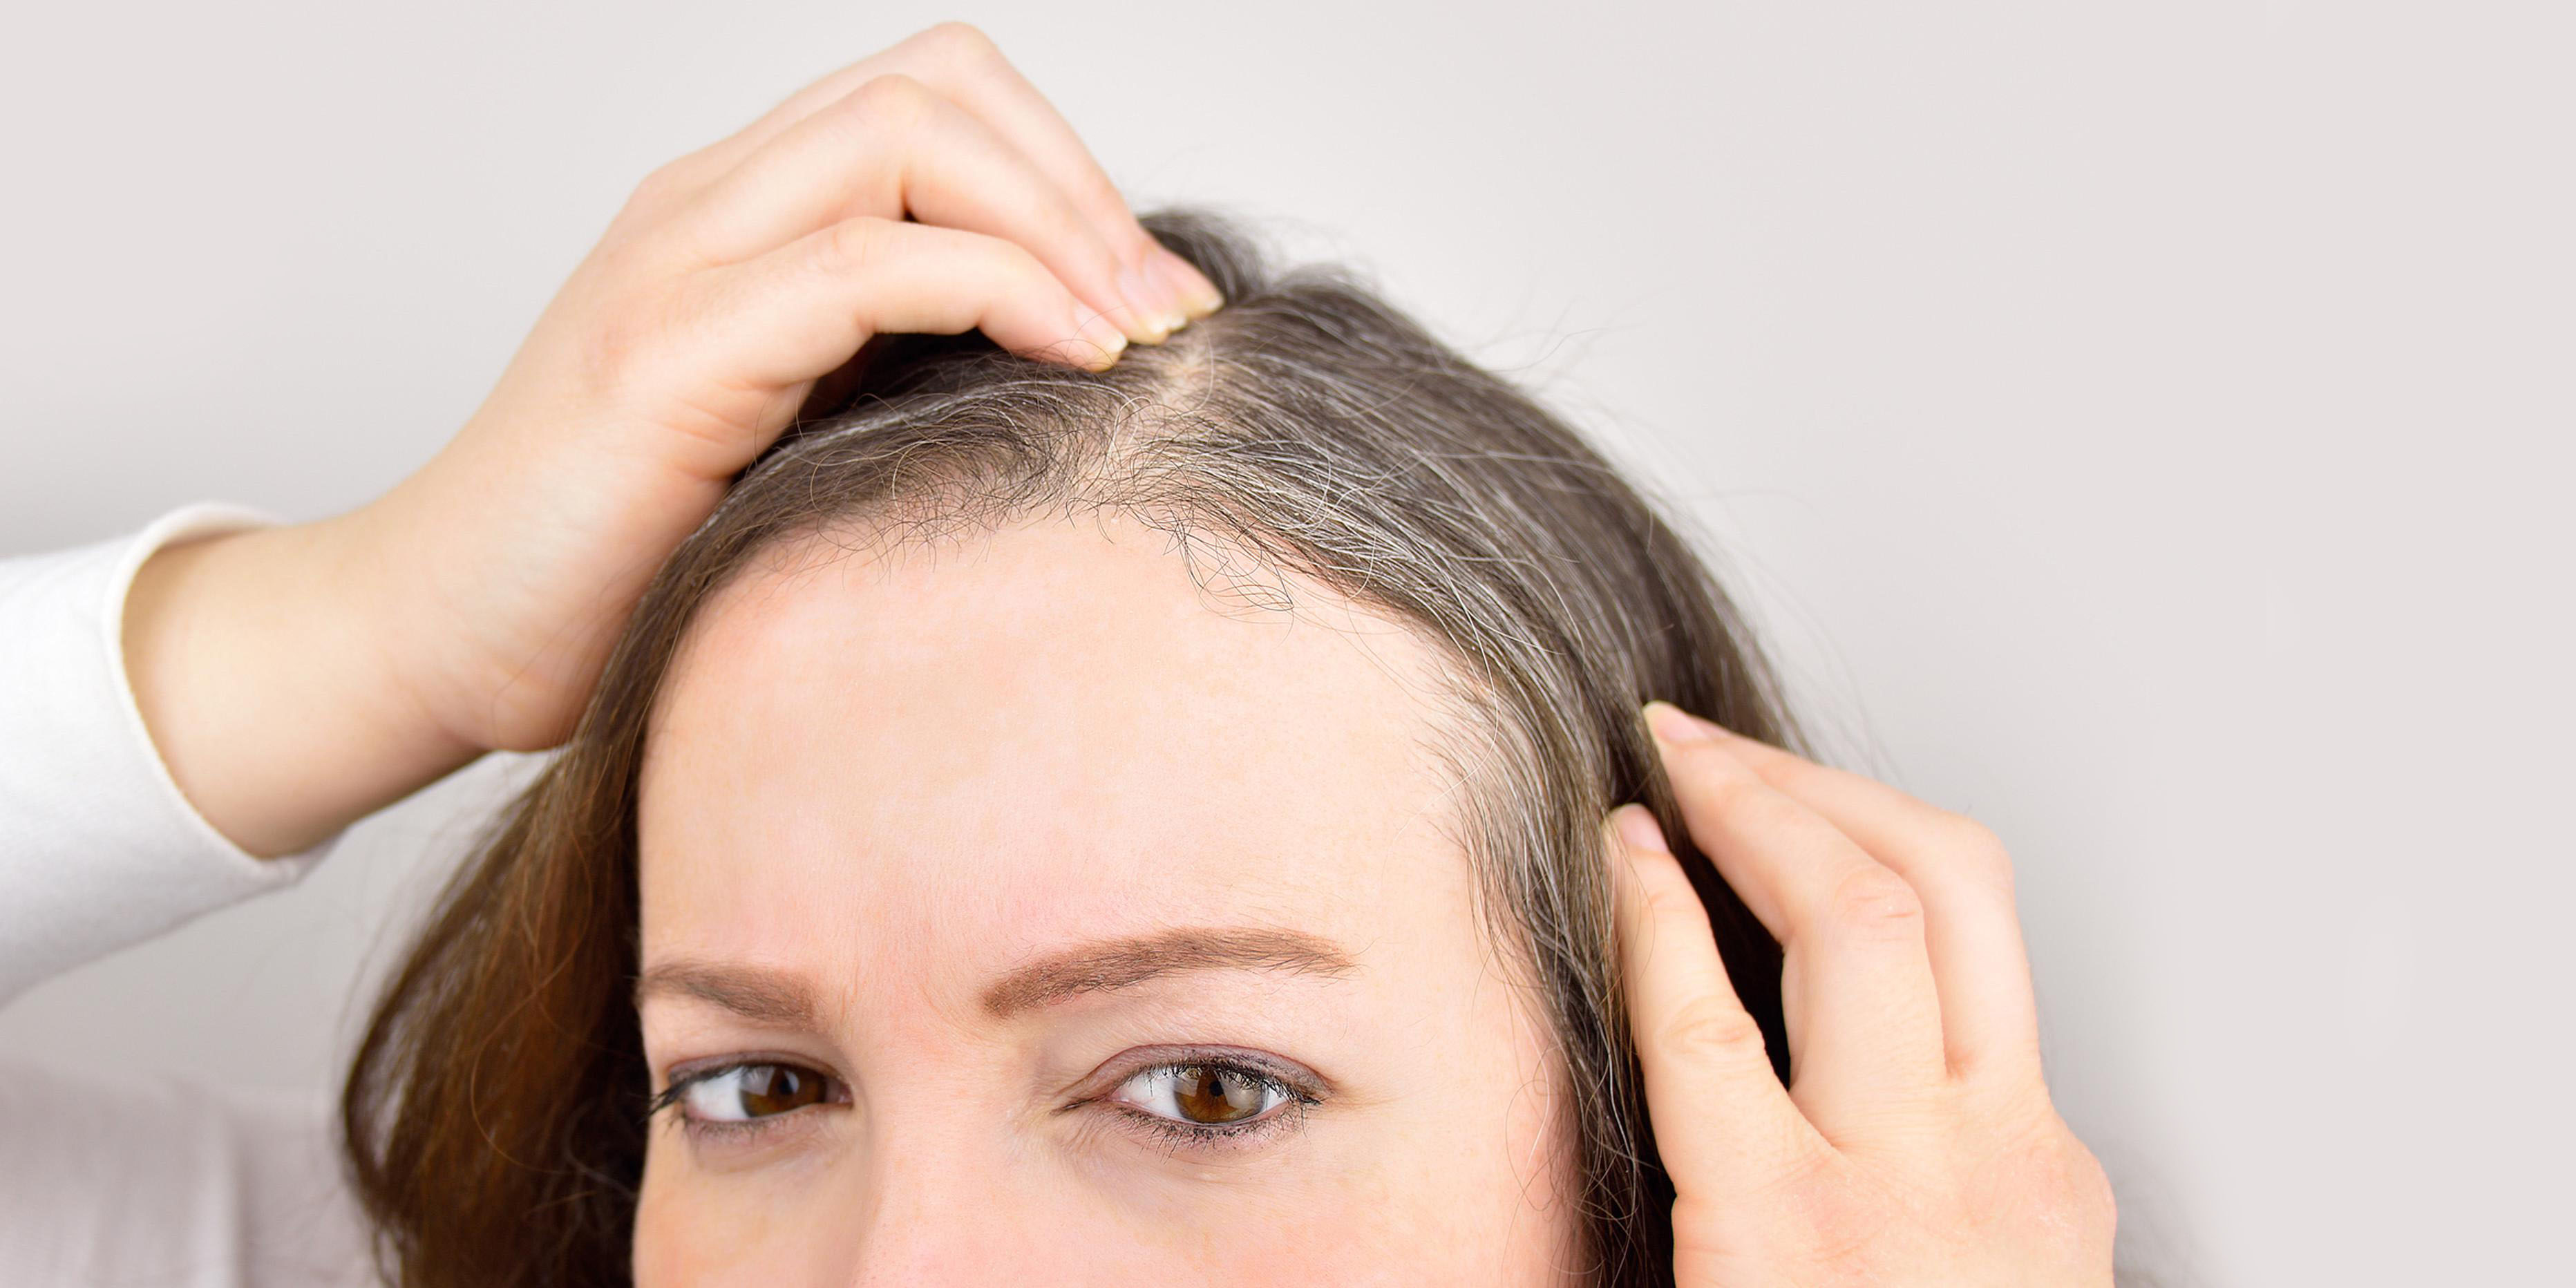 It’s proven: Stress can trigger the appearance of grey hair!